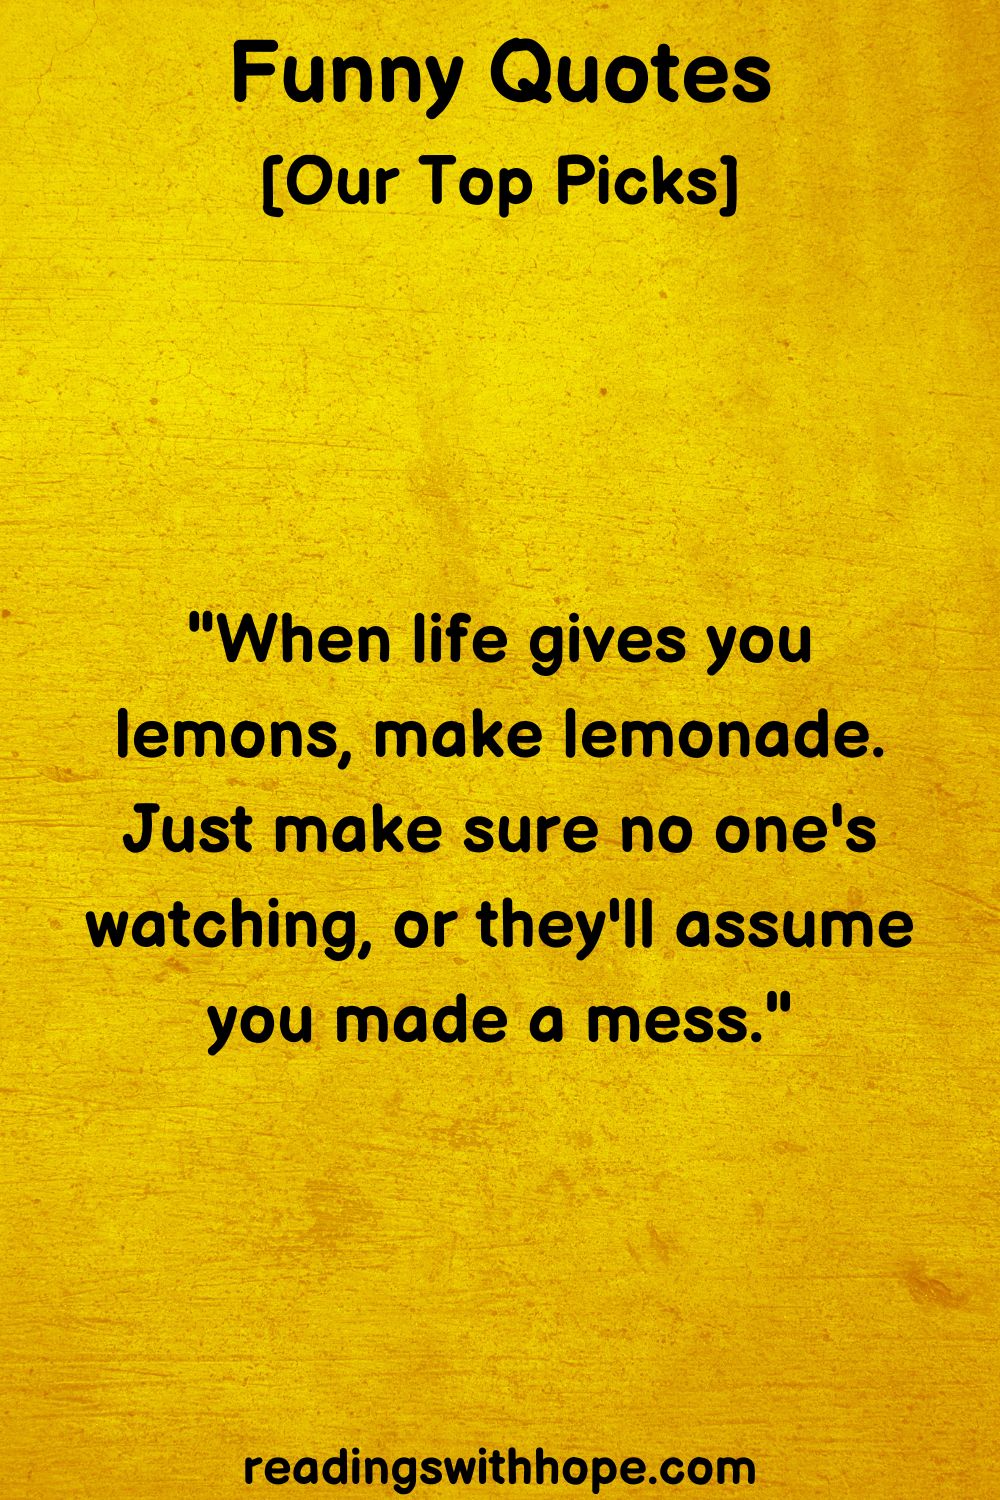 24 Funny Quotes about Life, Friends and Co.